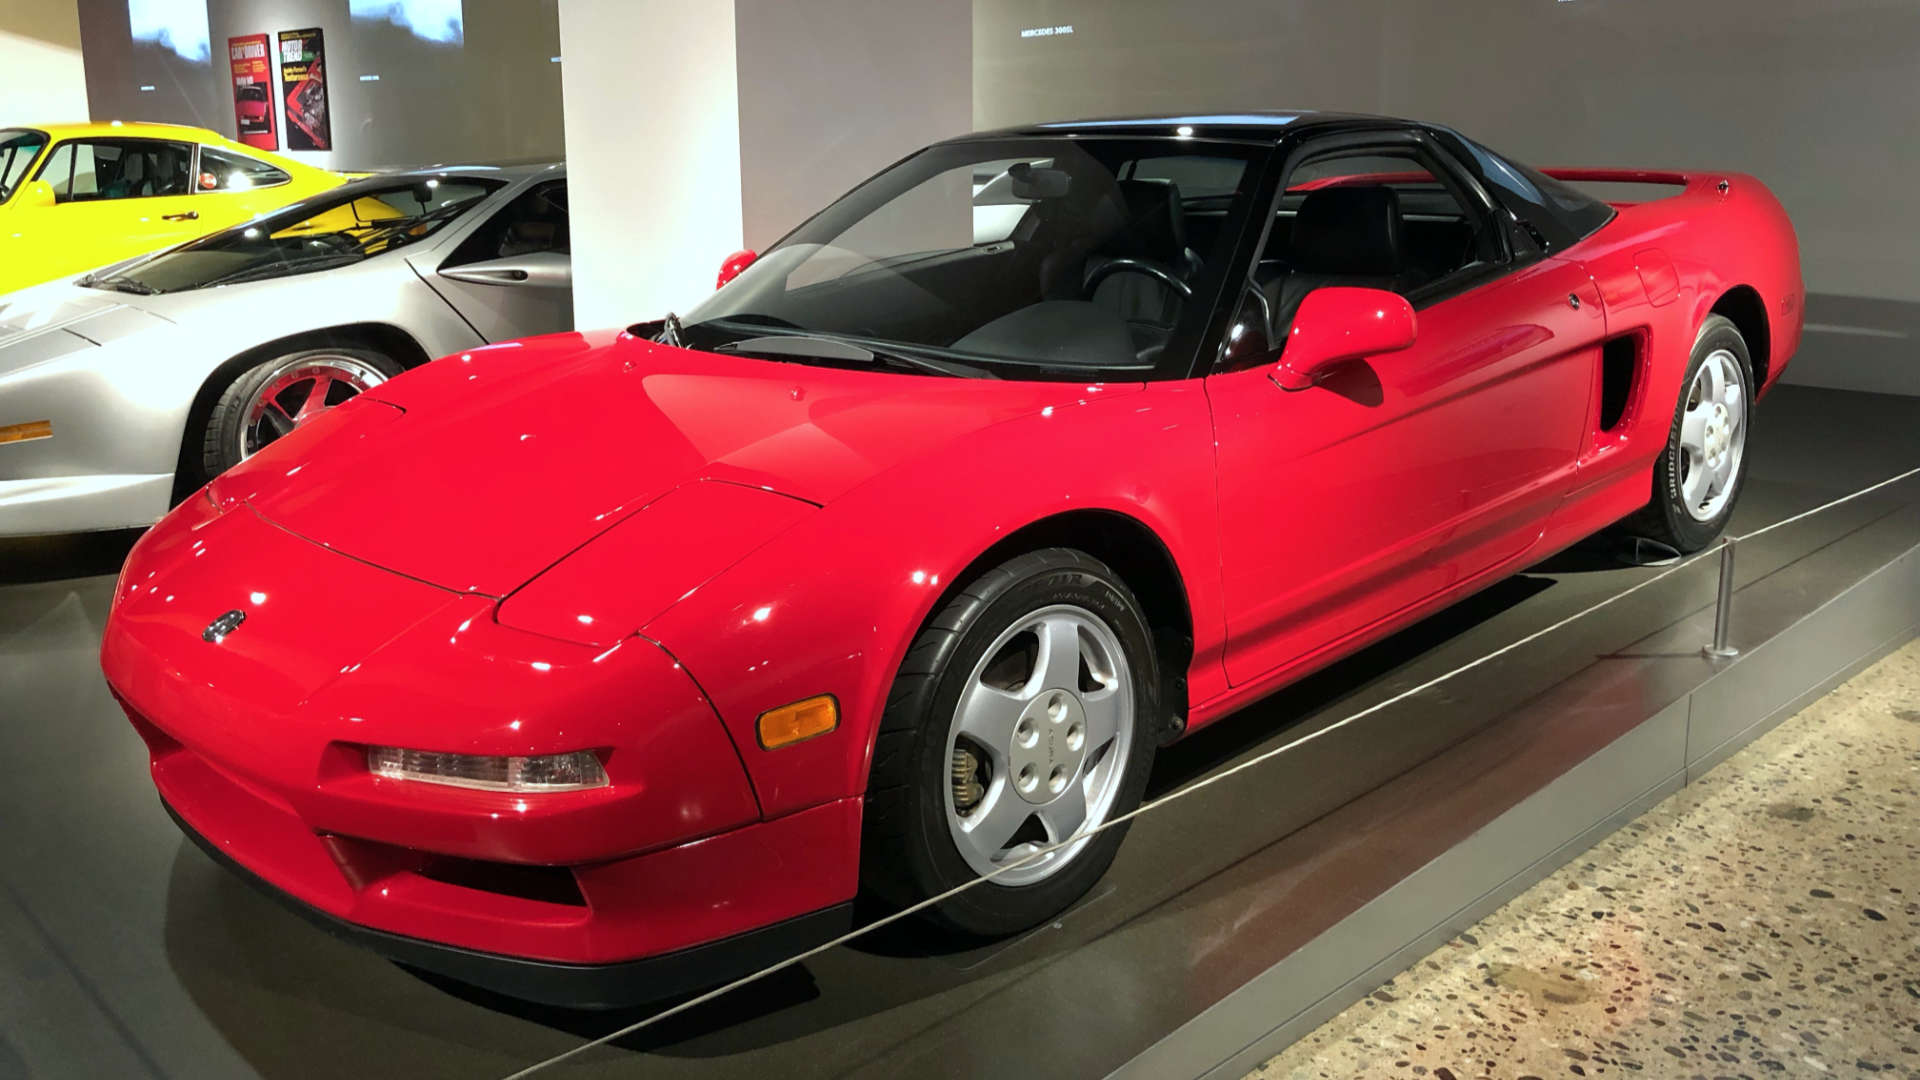 A visit to the Peterson Automotive Museum in LA (trailing Mr. 1500 by just a handful of weeks) served as a reminder that buying an absurd toy car, such as this Acura NSX, might not even throw you off course.